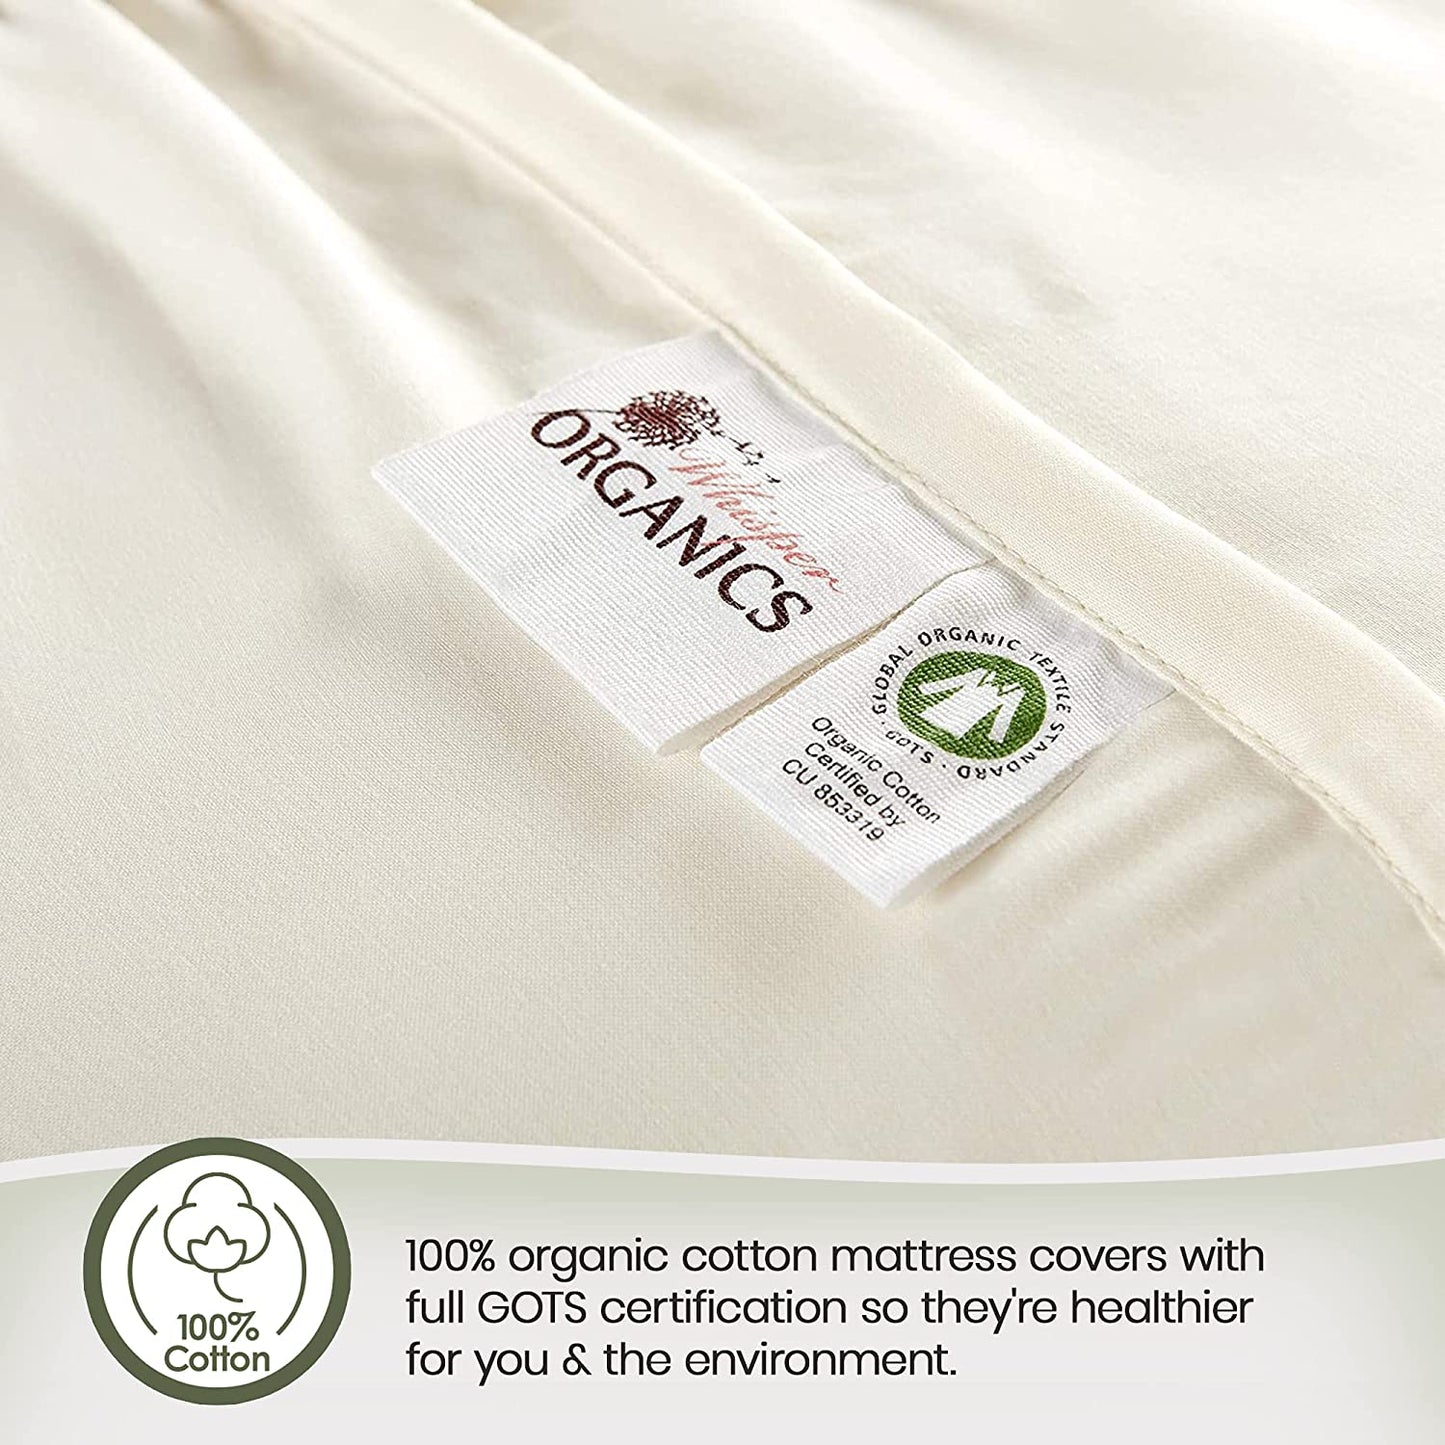 , 100% Organic Cotton Mattress Protector - Breathable Cooling Quilted Fitted Mattress Pad Cover, GOTS Certified - Ivory Color, 17" Deep Pocket (Full Bed Size)